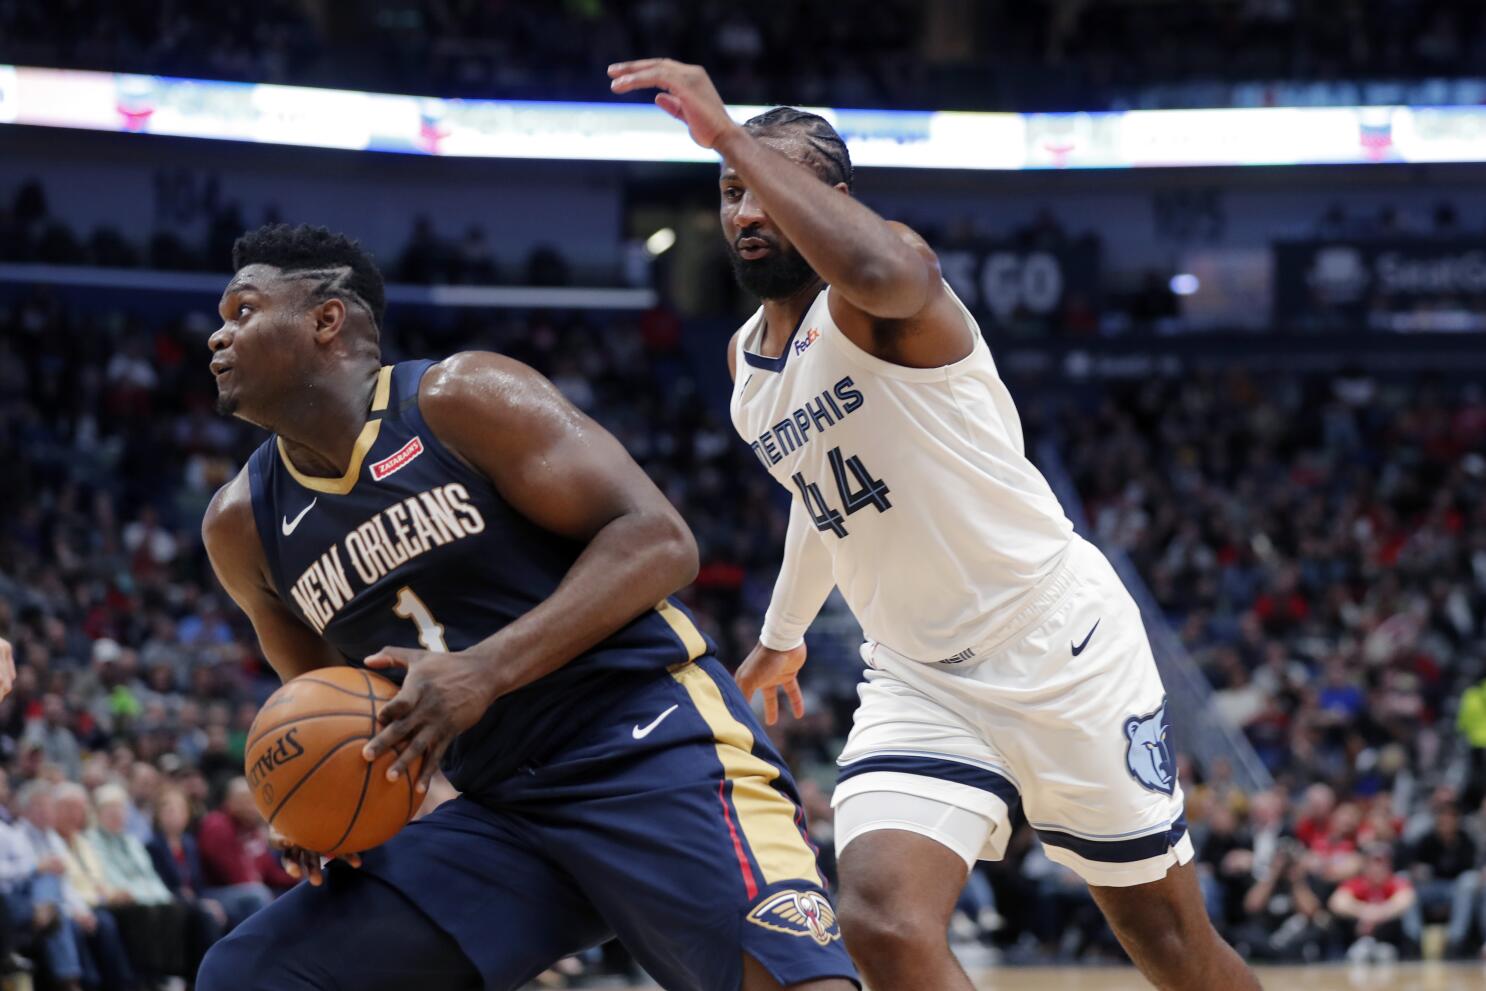 Pelicans star Zion Williamson diagnosed with hip contusion after hard fall